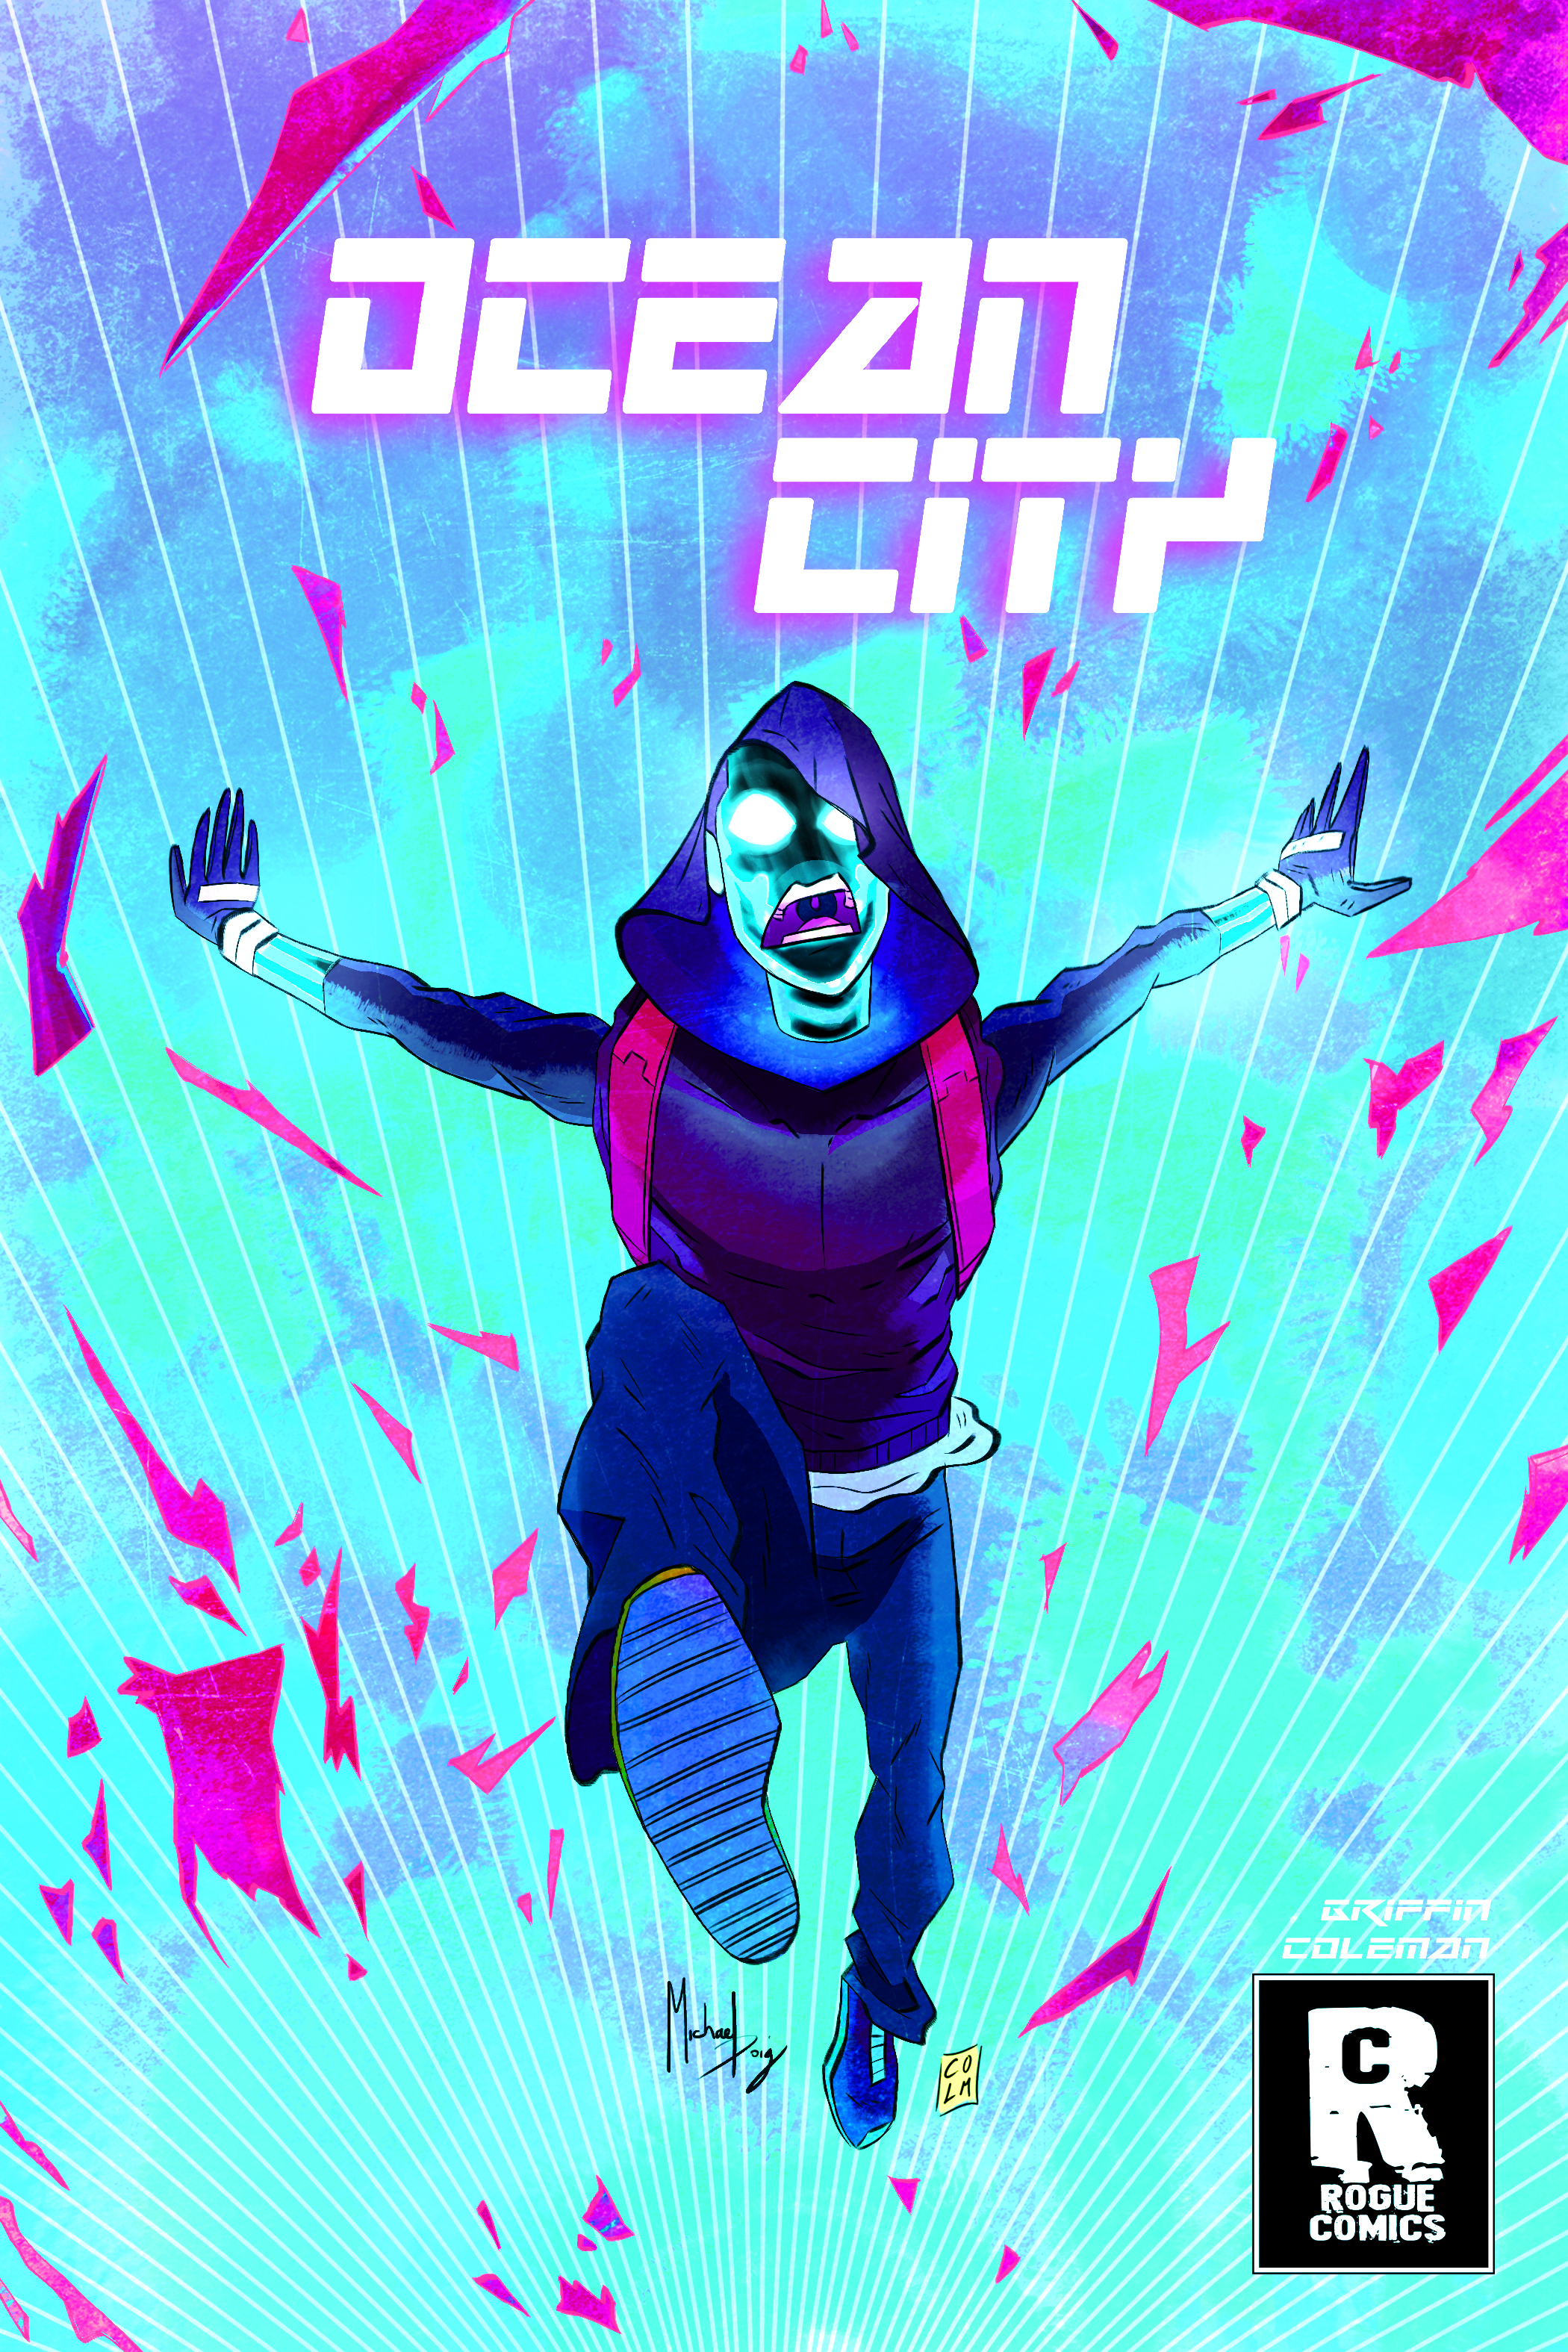 Issue #4 Cover.jpg